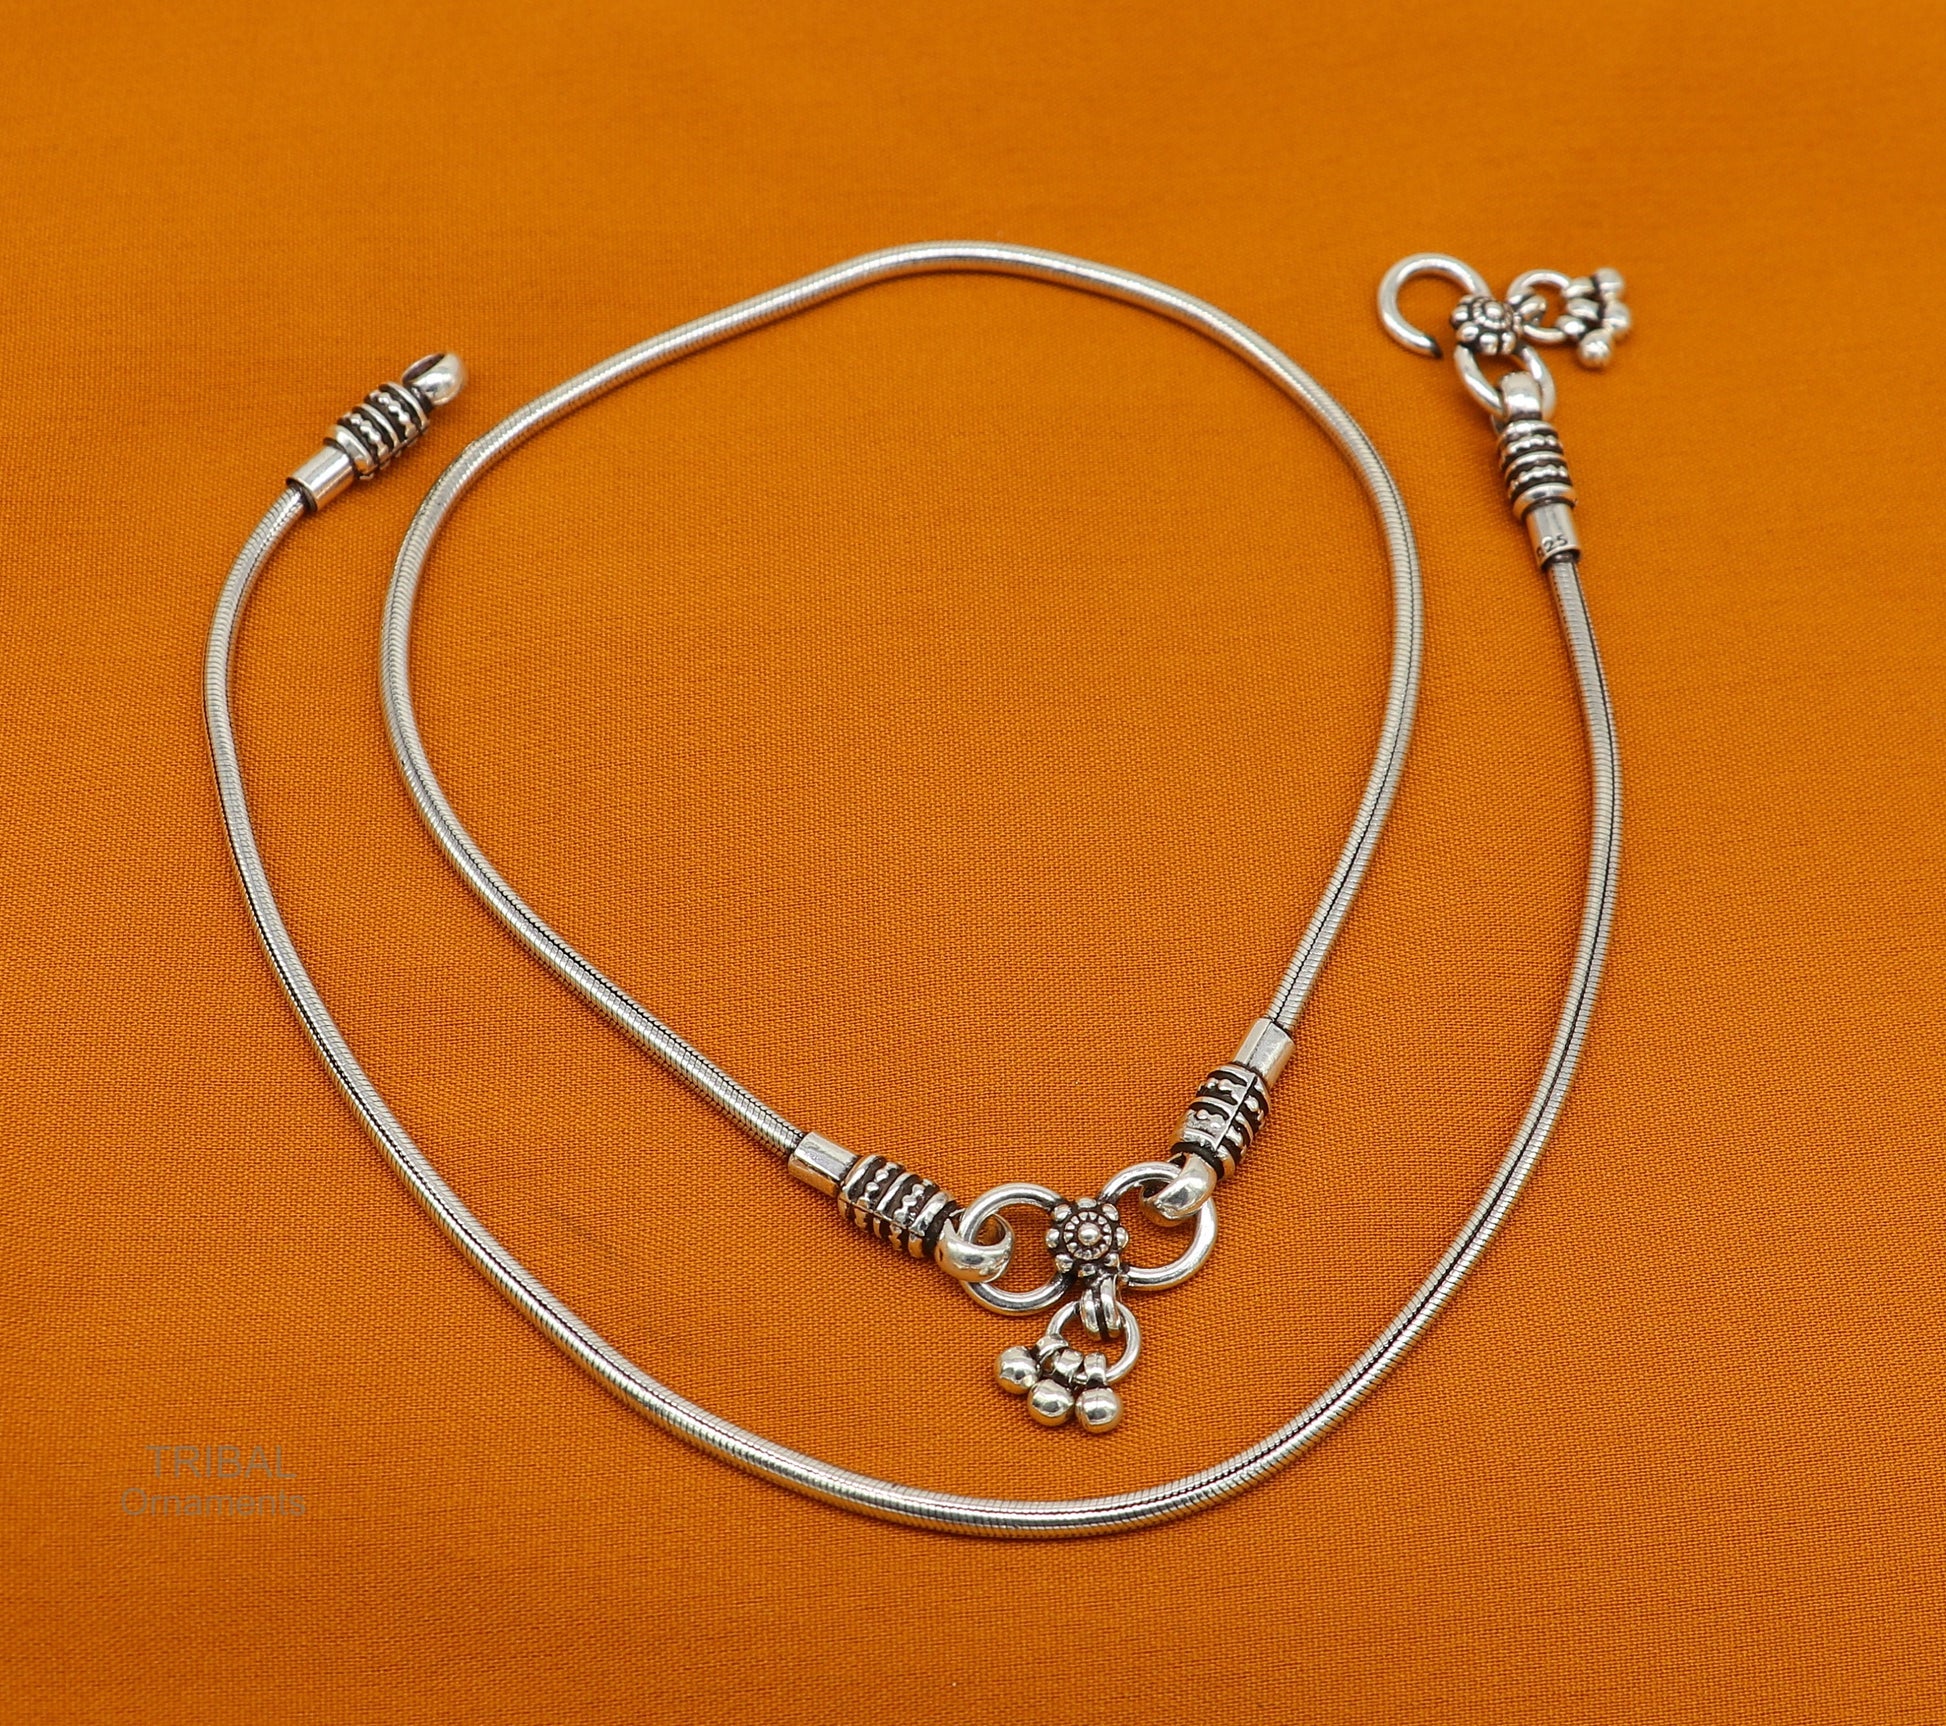 10.5" Vintage style snake chain anklet 925 sterling silver ankle bracelet, silver anklets, foot bracelet amazing belly dance jewelry ank447 - TRIBAL ORNAMENTS